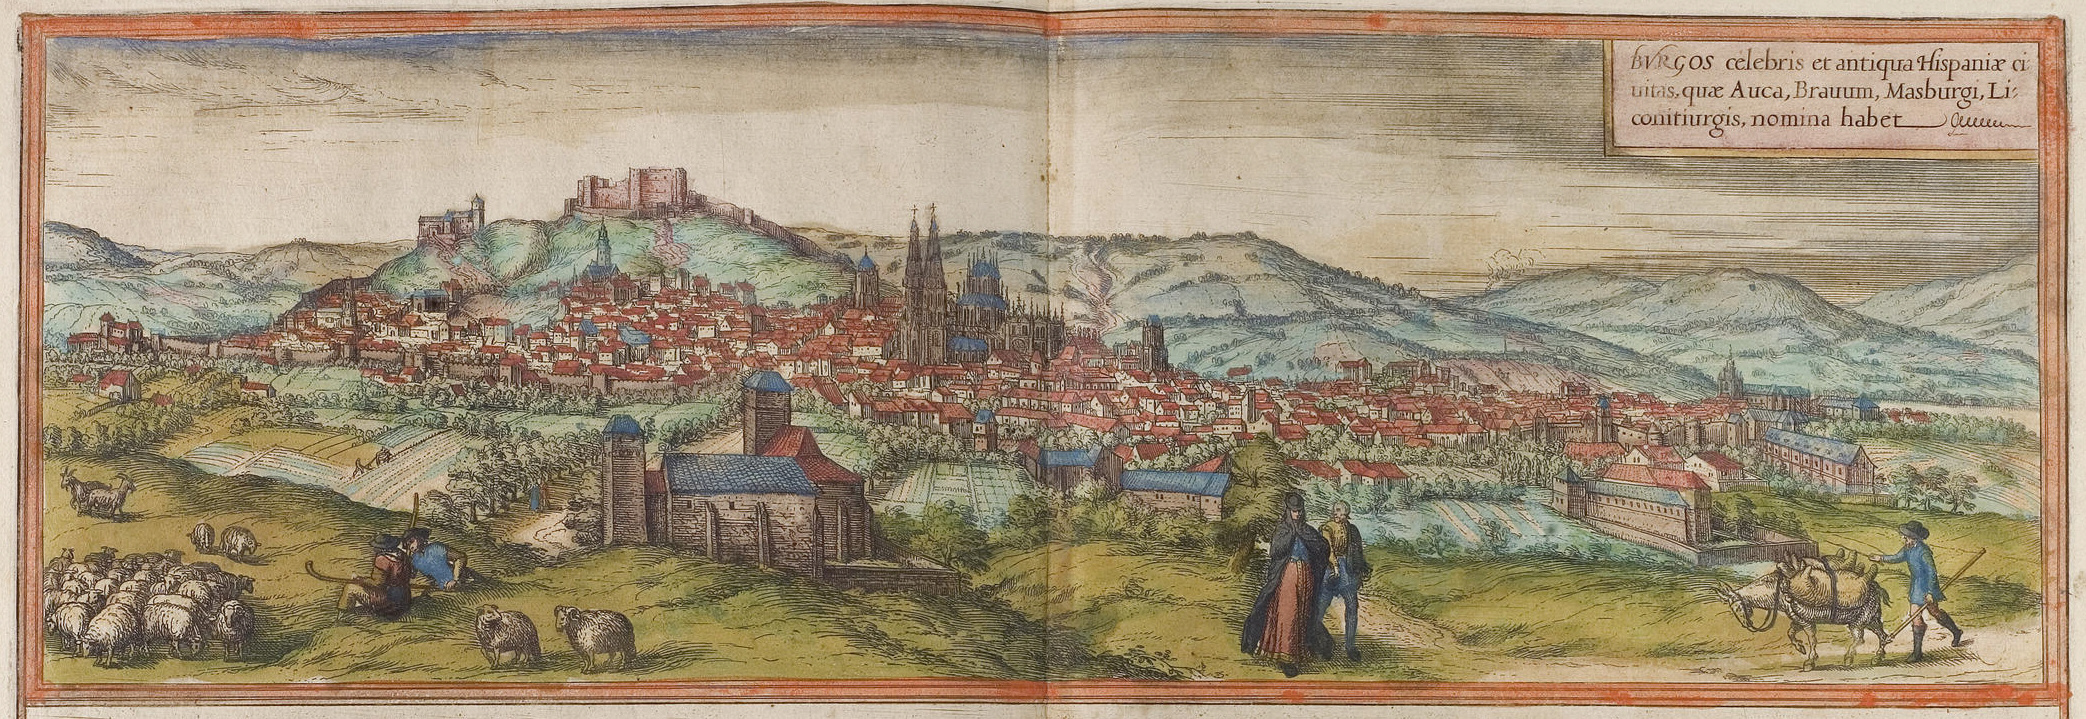 A colored drawing of the city of Burgos, Spain, around 1572. There are shepherds, nobleman, and a trader in the foreground. A cathedral dominates the city center, and there is a castle on the hill in the background. 